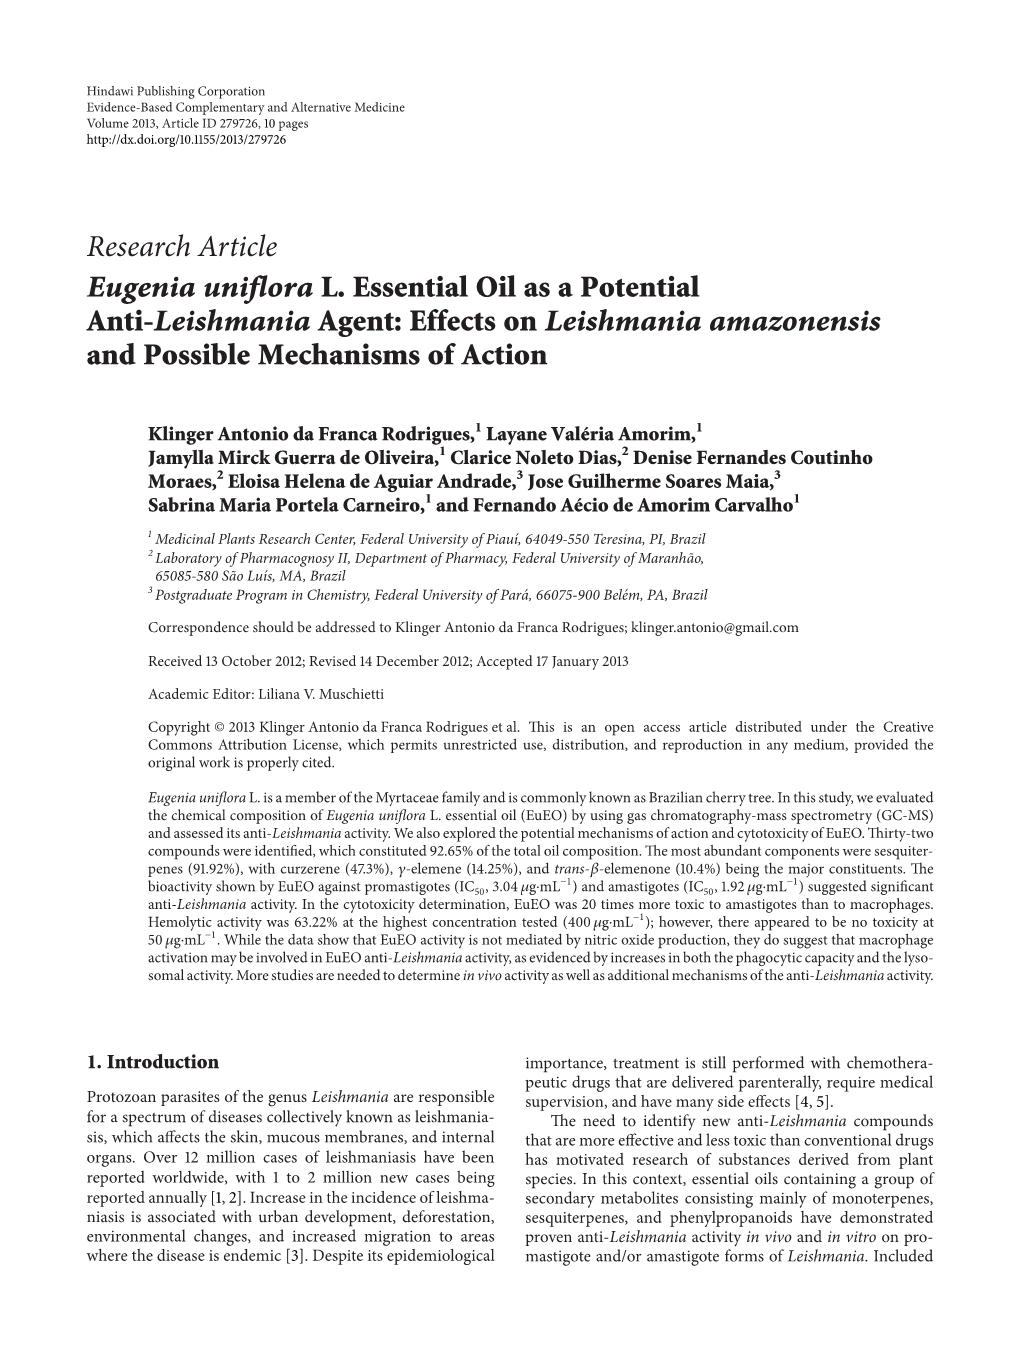 Eugenia Uniflora L. Essential Oil As a Potential Anti-Leishmania Agent: Effects on Leishmania Amazonensis and Possible Mechanisms of Action